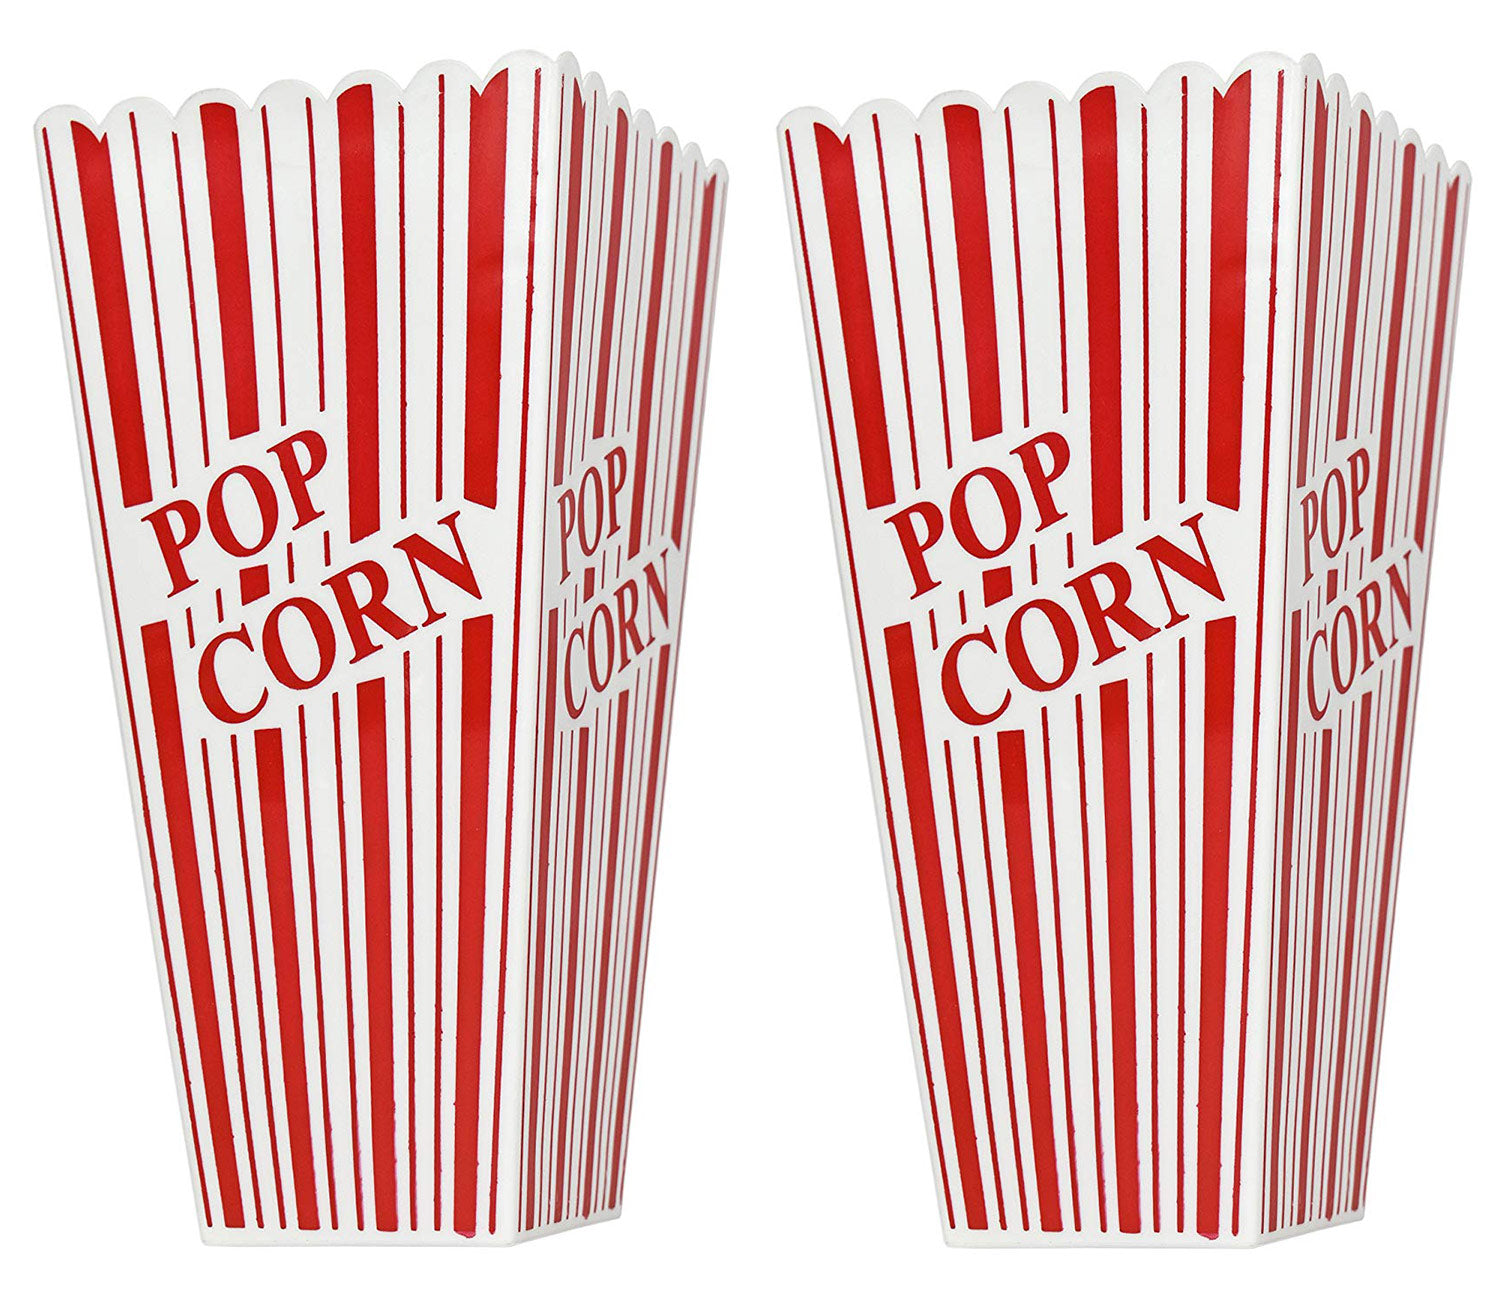 Premius 2-Pack Classic Striped Popcorn Holder, Red-White, 7.75x3.75x3.75 Inches